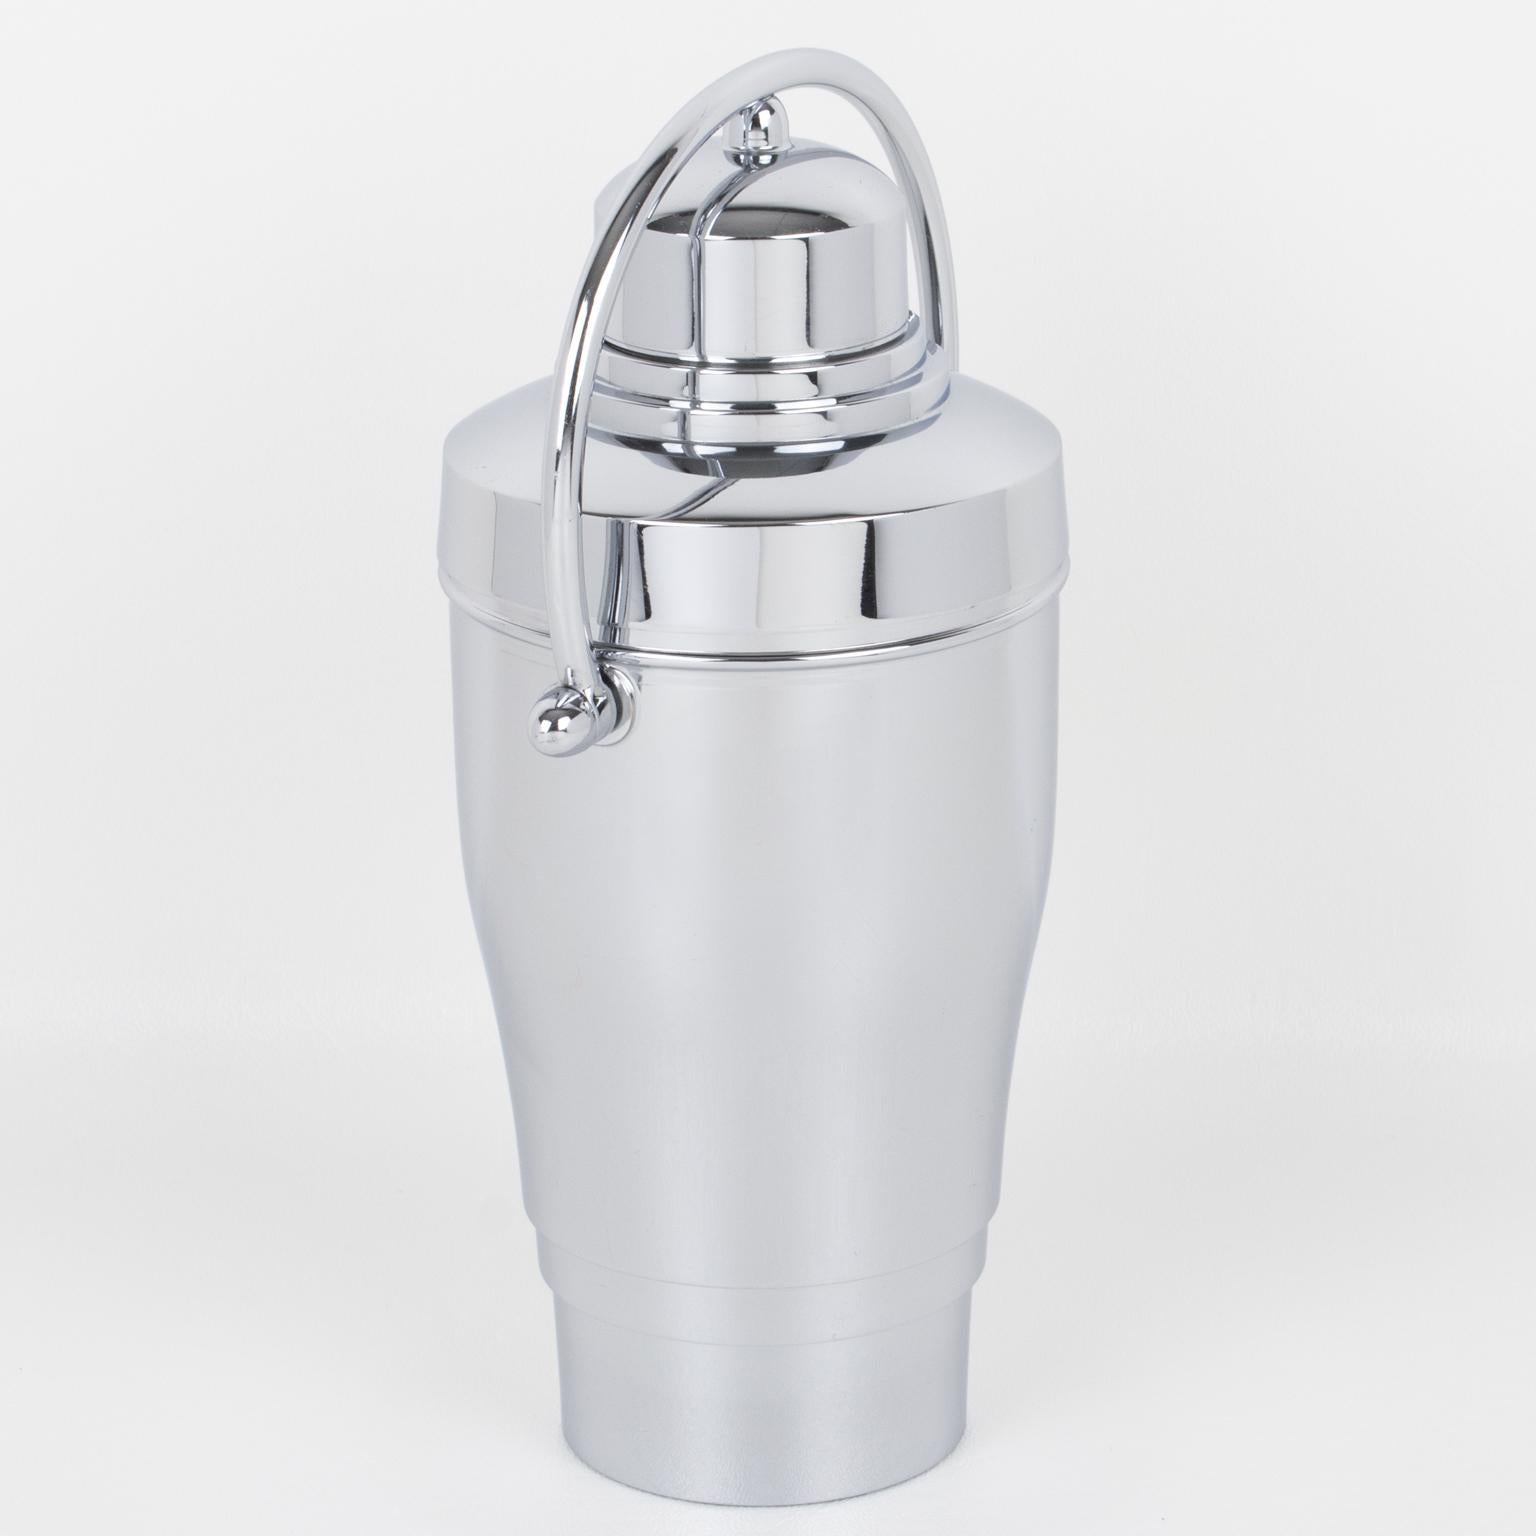 This stunning English Art Deco chrome cocktail or Martini shaker features a streamlined design, boasting a puffy shape and a rotating locking handle. 
This is a typical yacht bar cocktail shaker, allowing the bartender to shake the drink with one